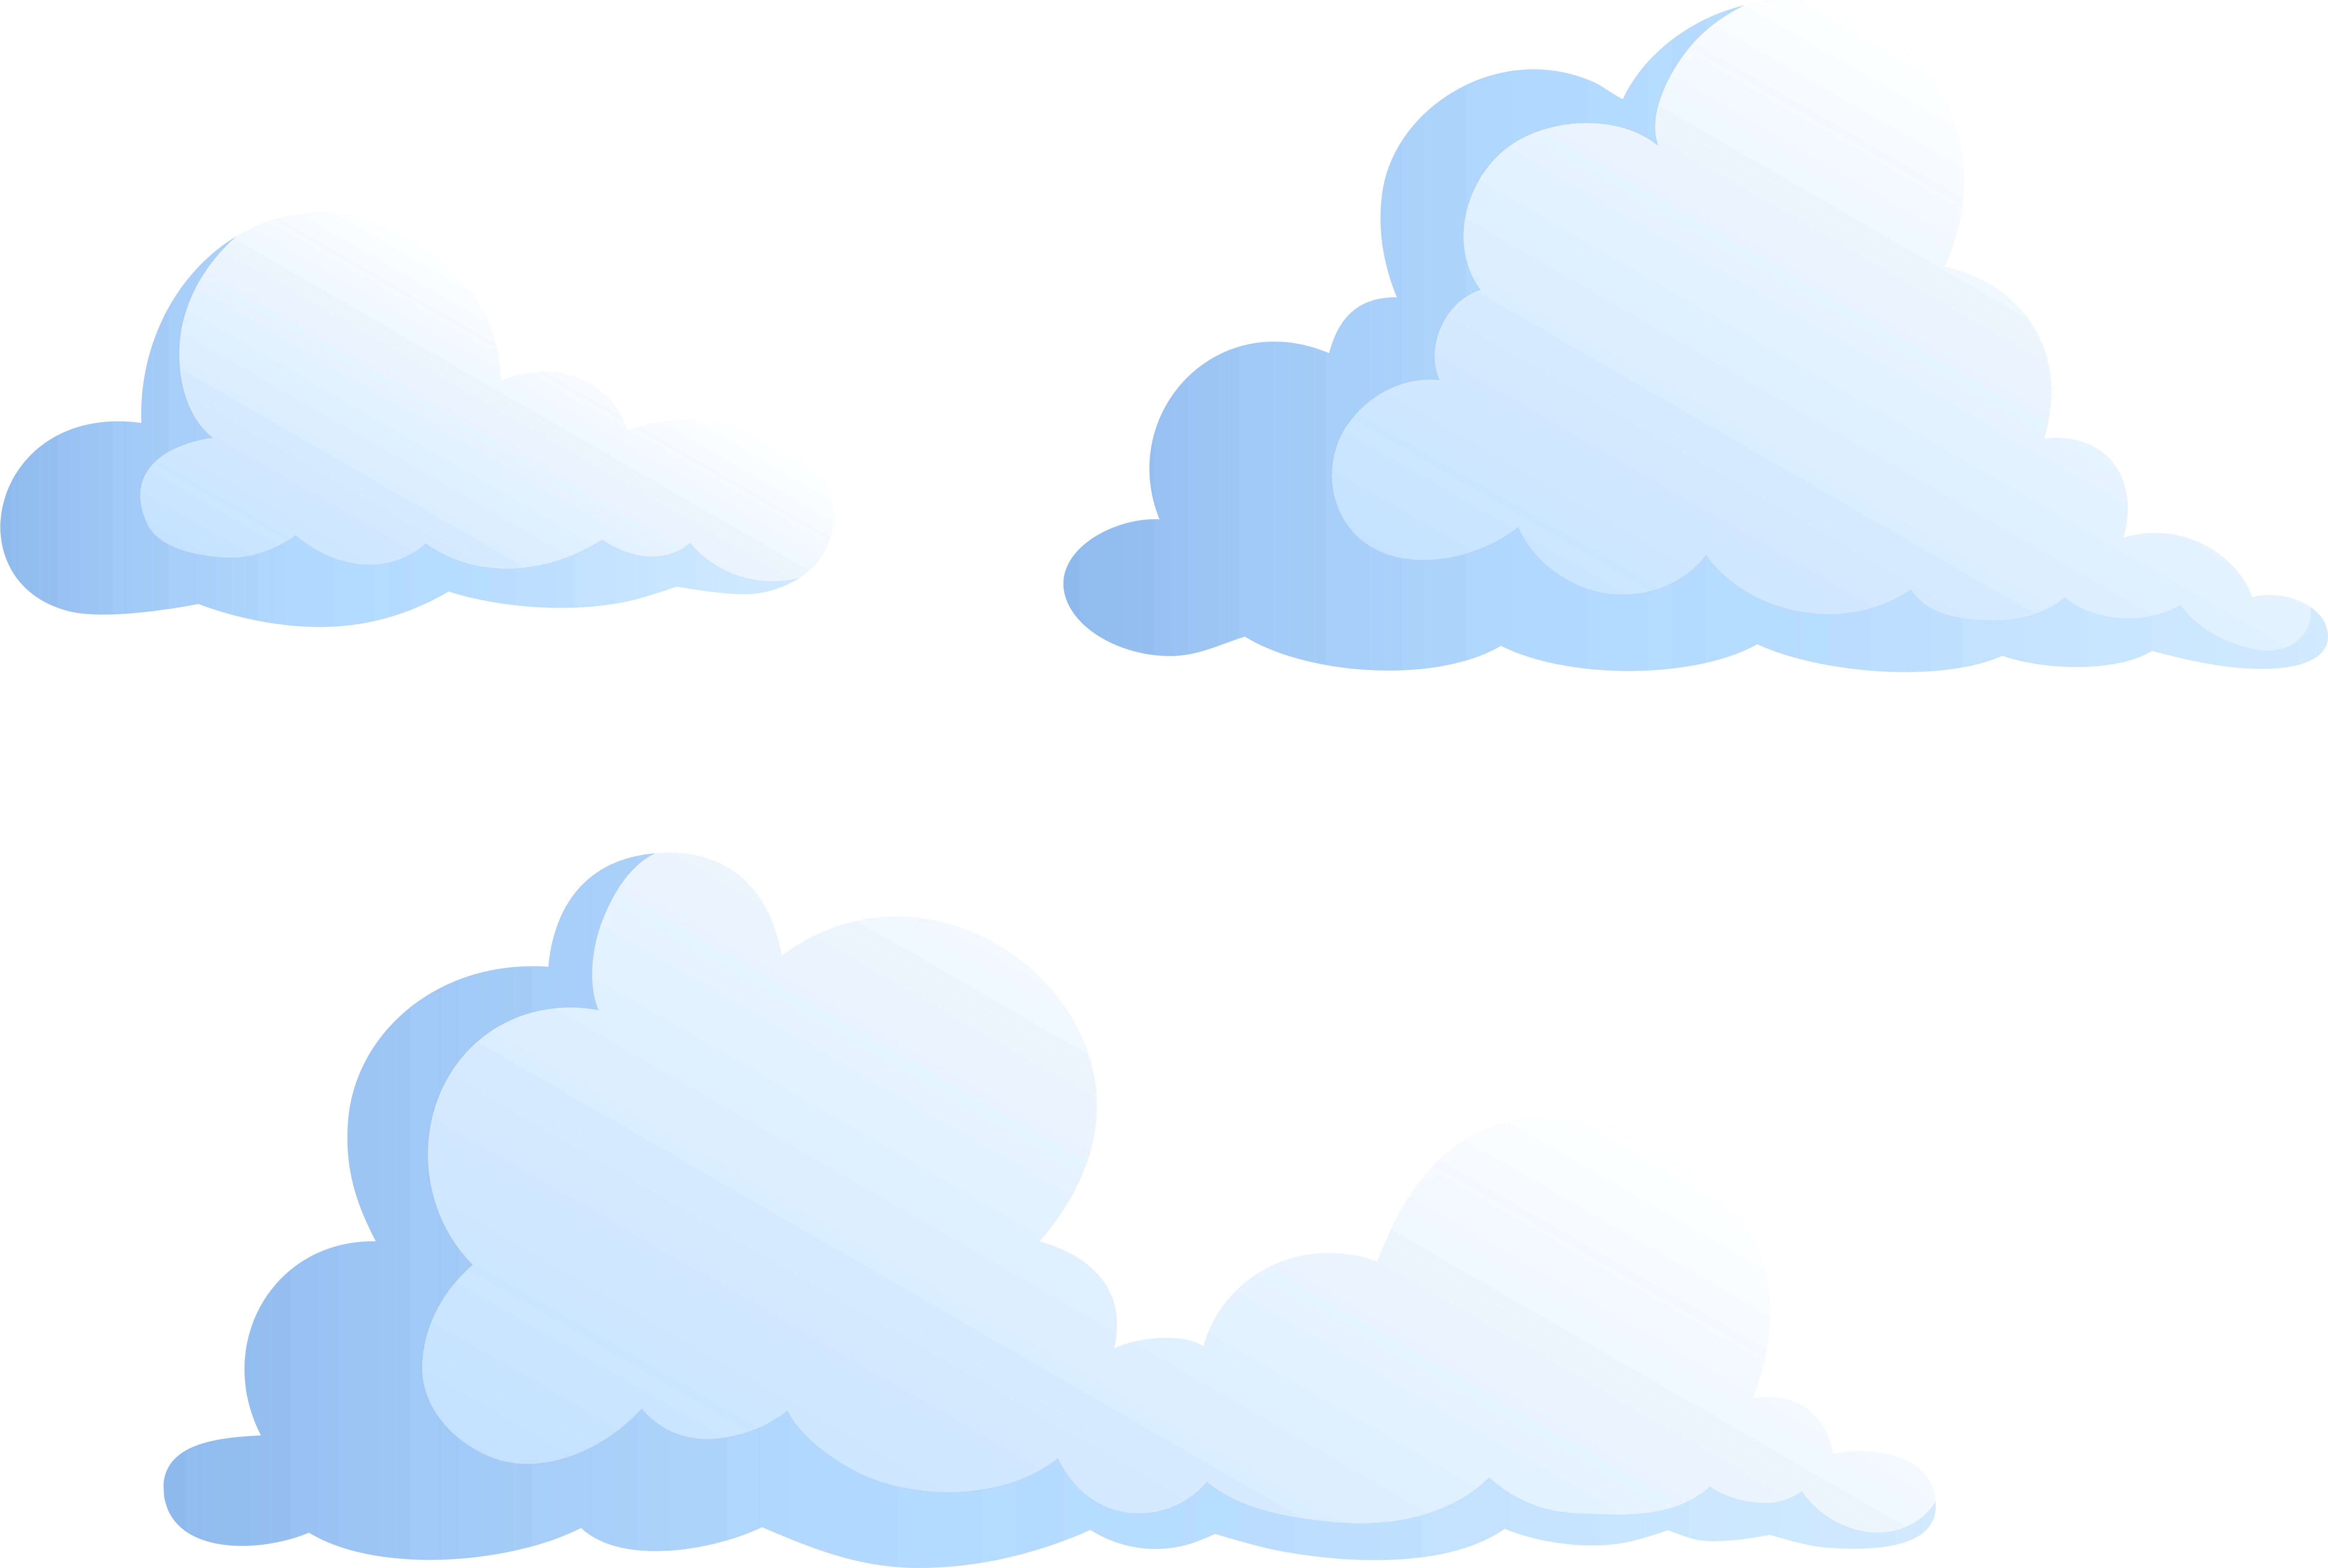 Download Clip Art Clouds Png PNG Image with No Background - PNGkey.com